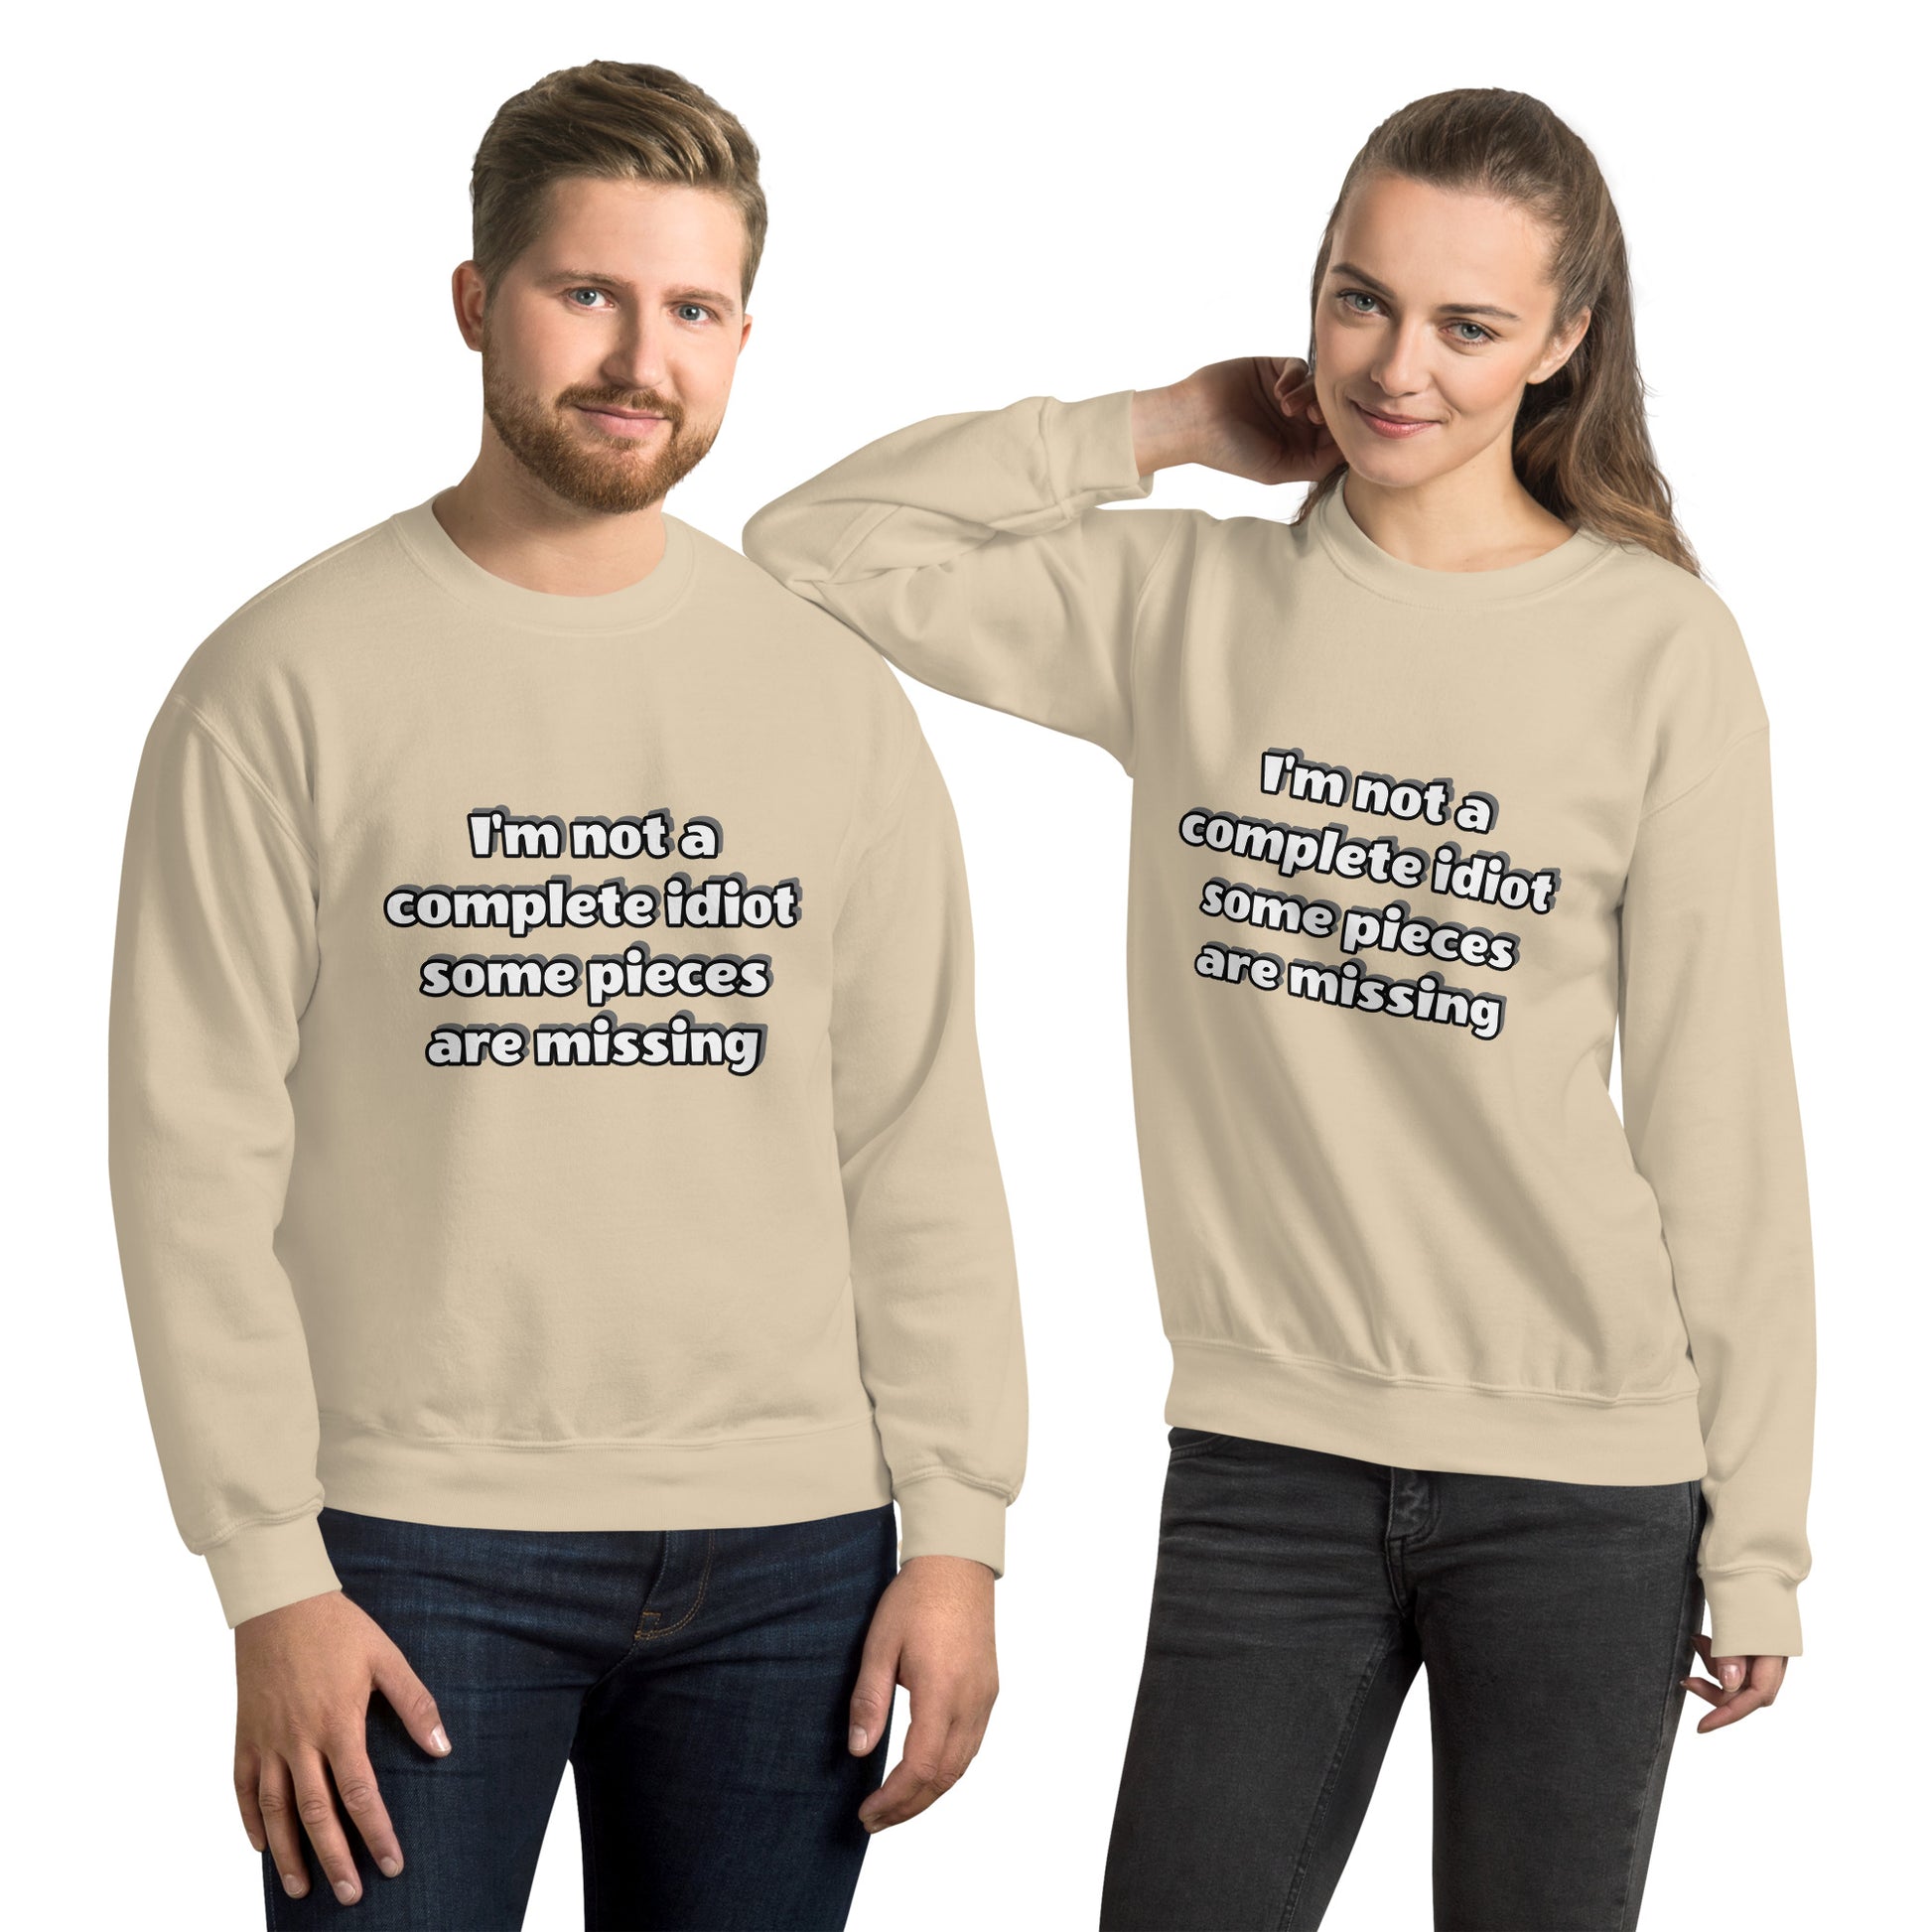 Man and women with sand sweatshirt with text “I’m not a complete idiot, some pieces are missing”